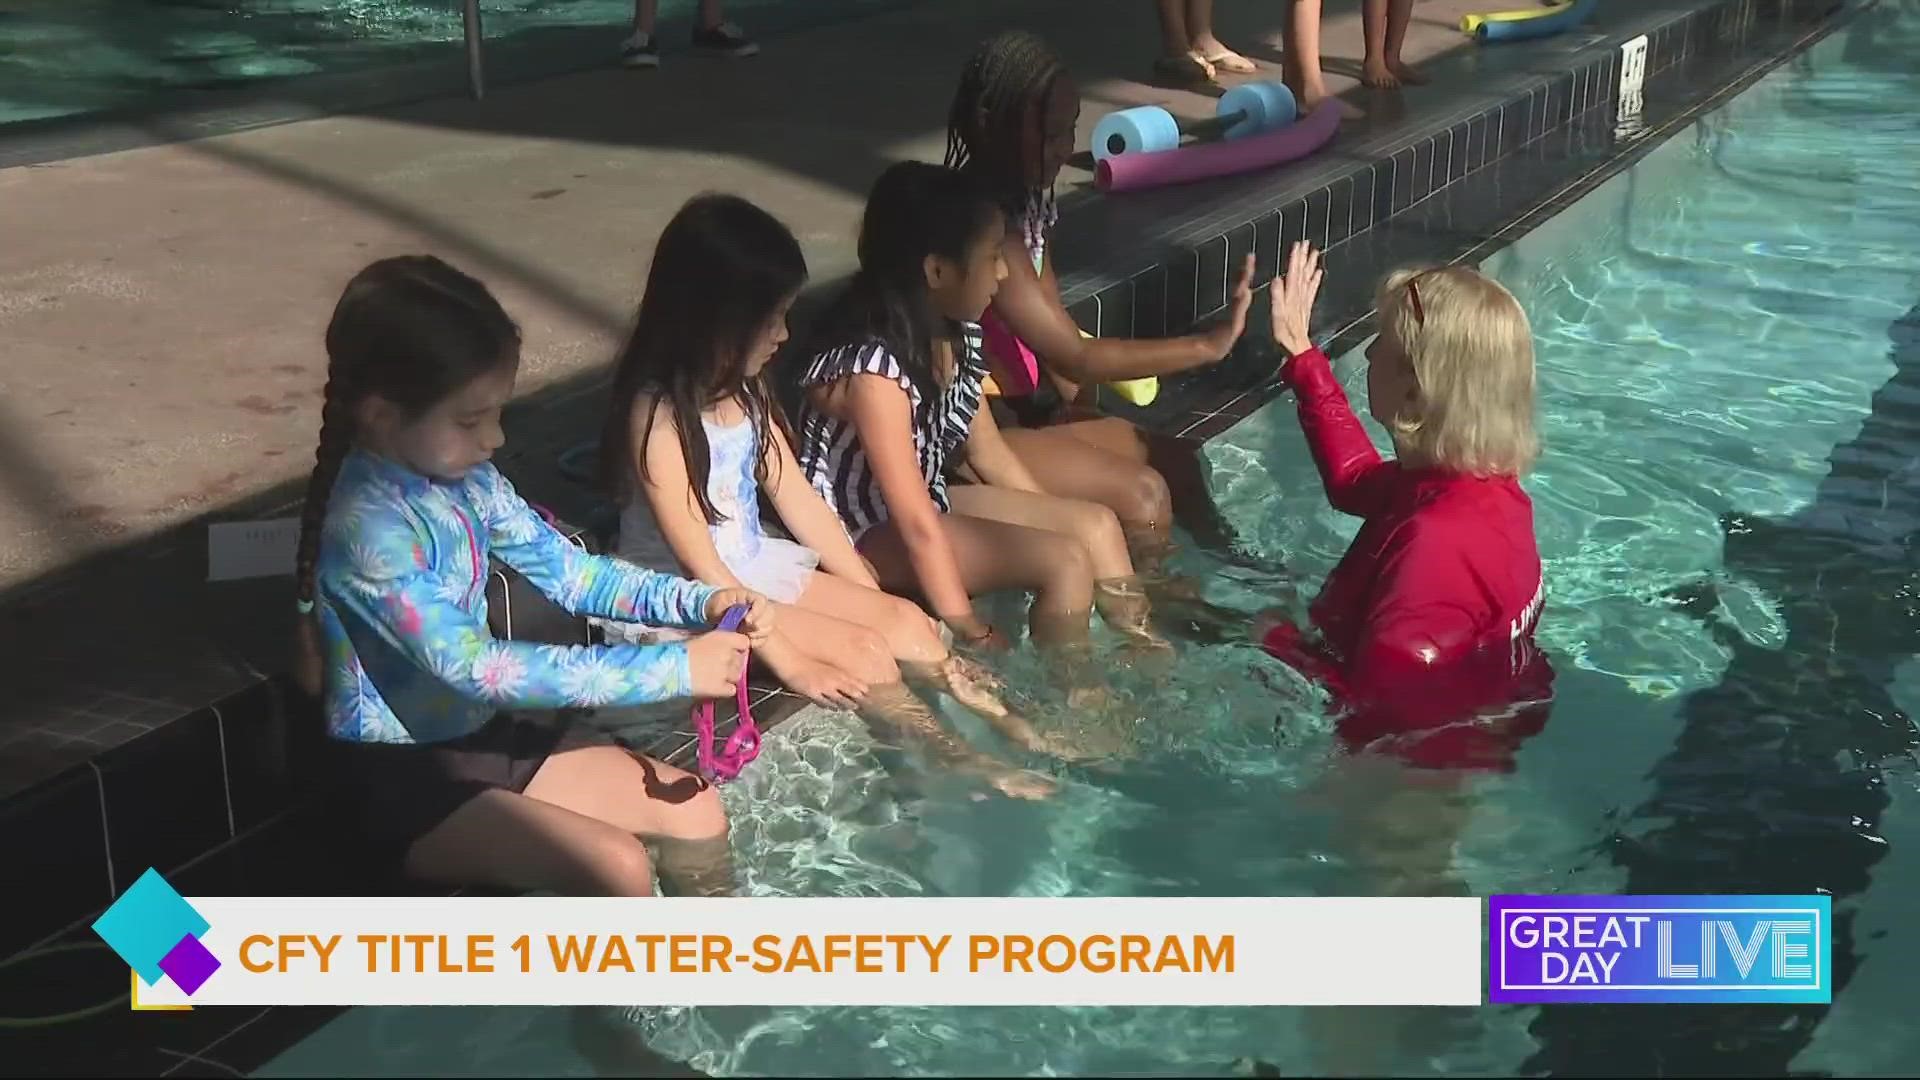 CFY Title 1 Water-Safety Program allows kids to get a two- week water safety class who may not have the means. The program transports the kids during the school day.